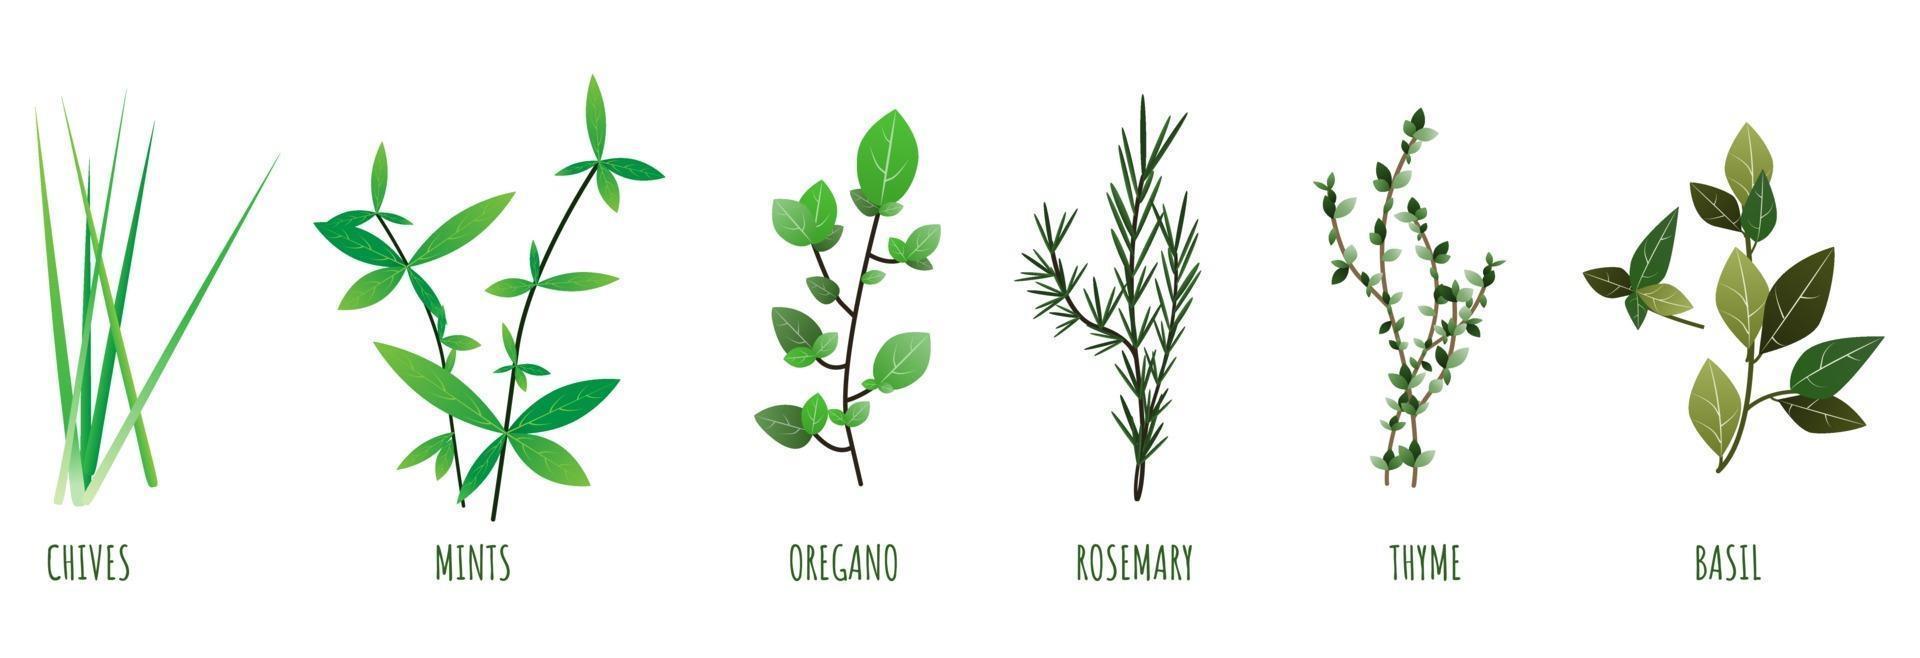 Herb illustration of chives, mints, oregano, rosemary, basil and thyme vector illustration.